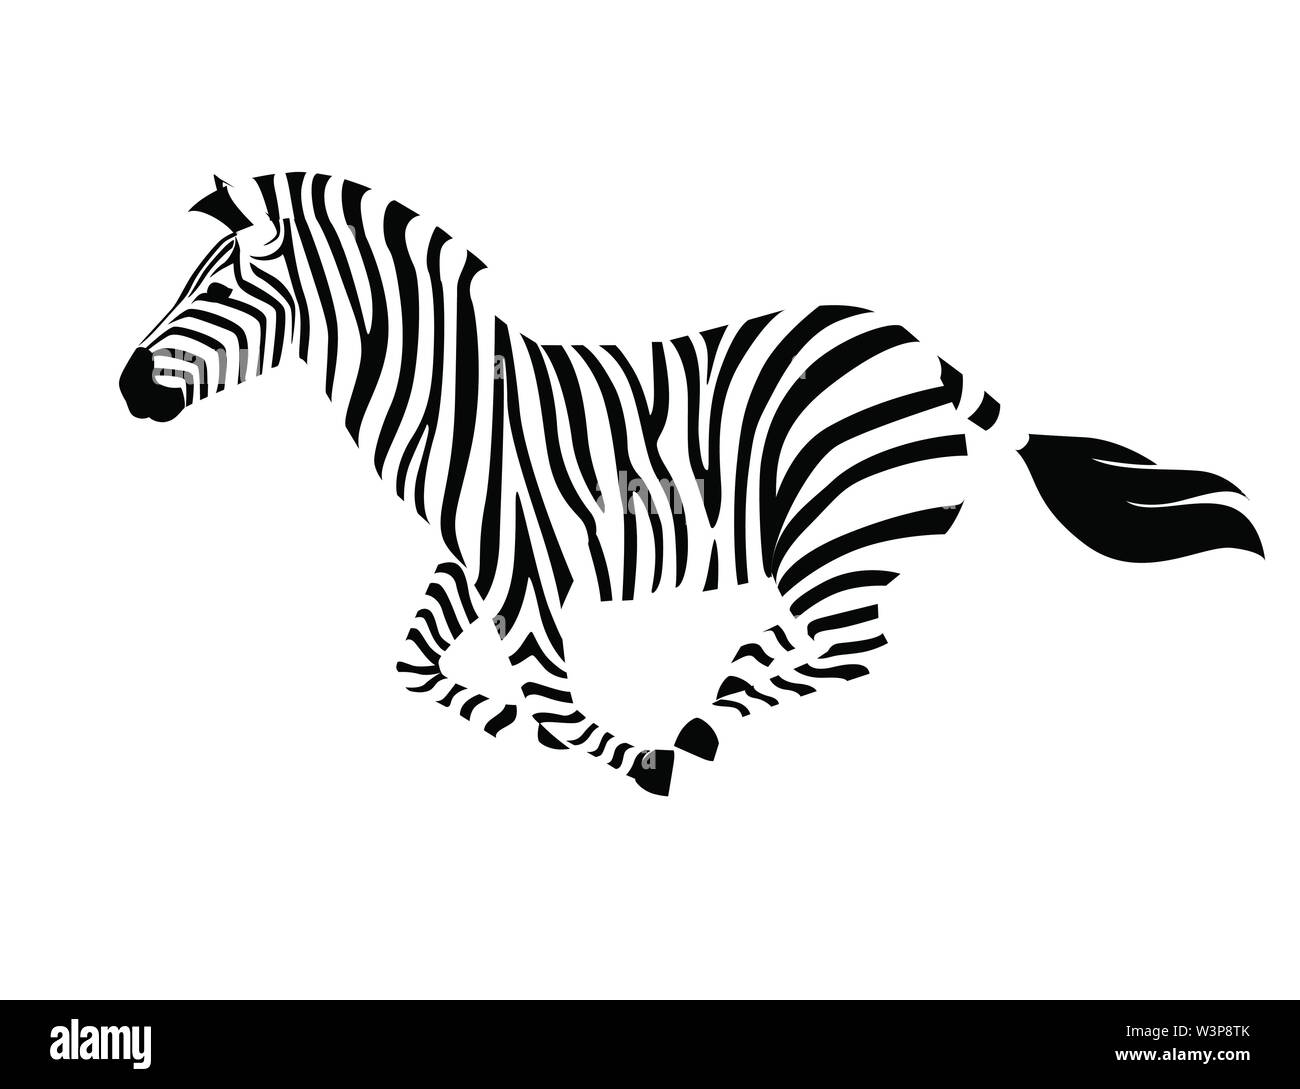 African zebra running side view outline striped silhouette animal ...